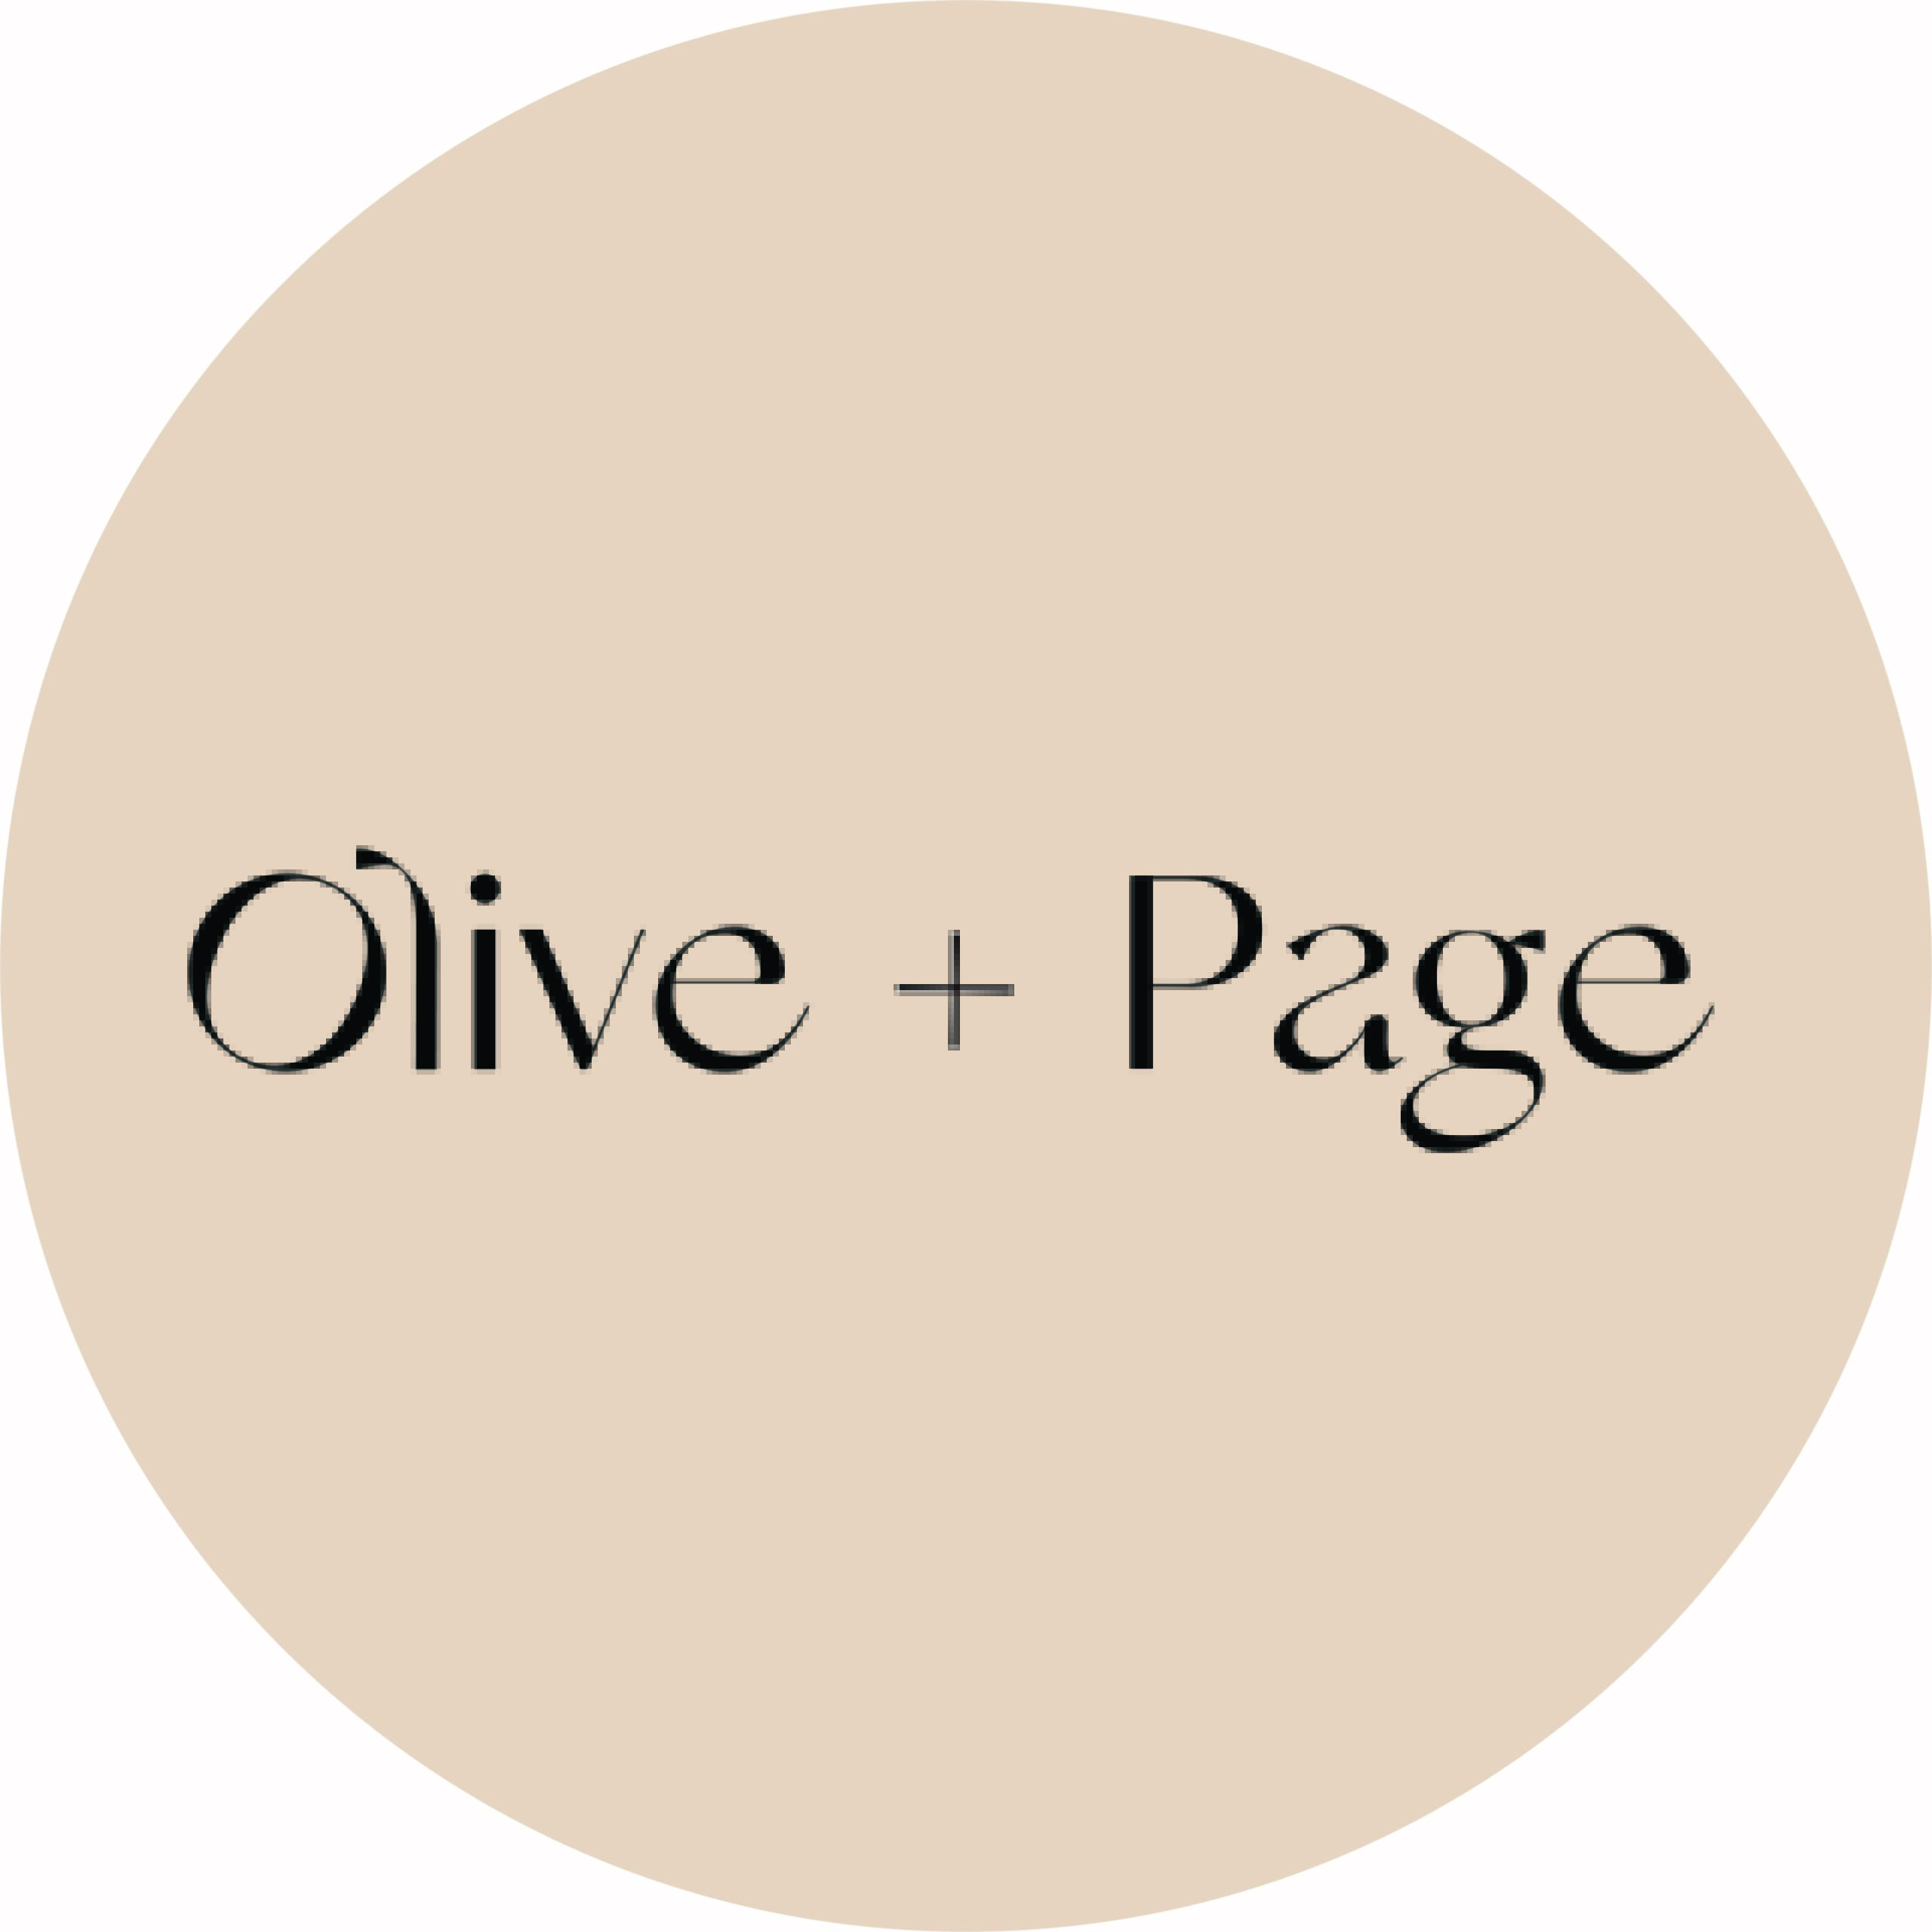 Olive + Page